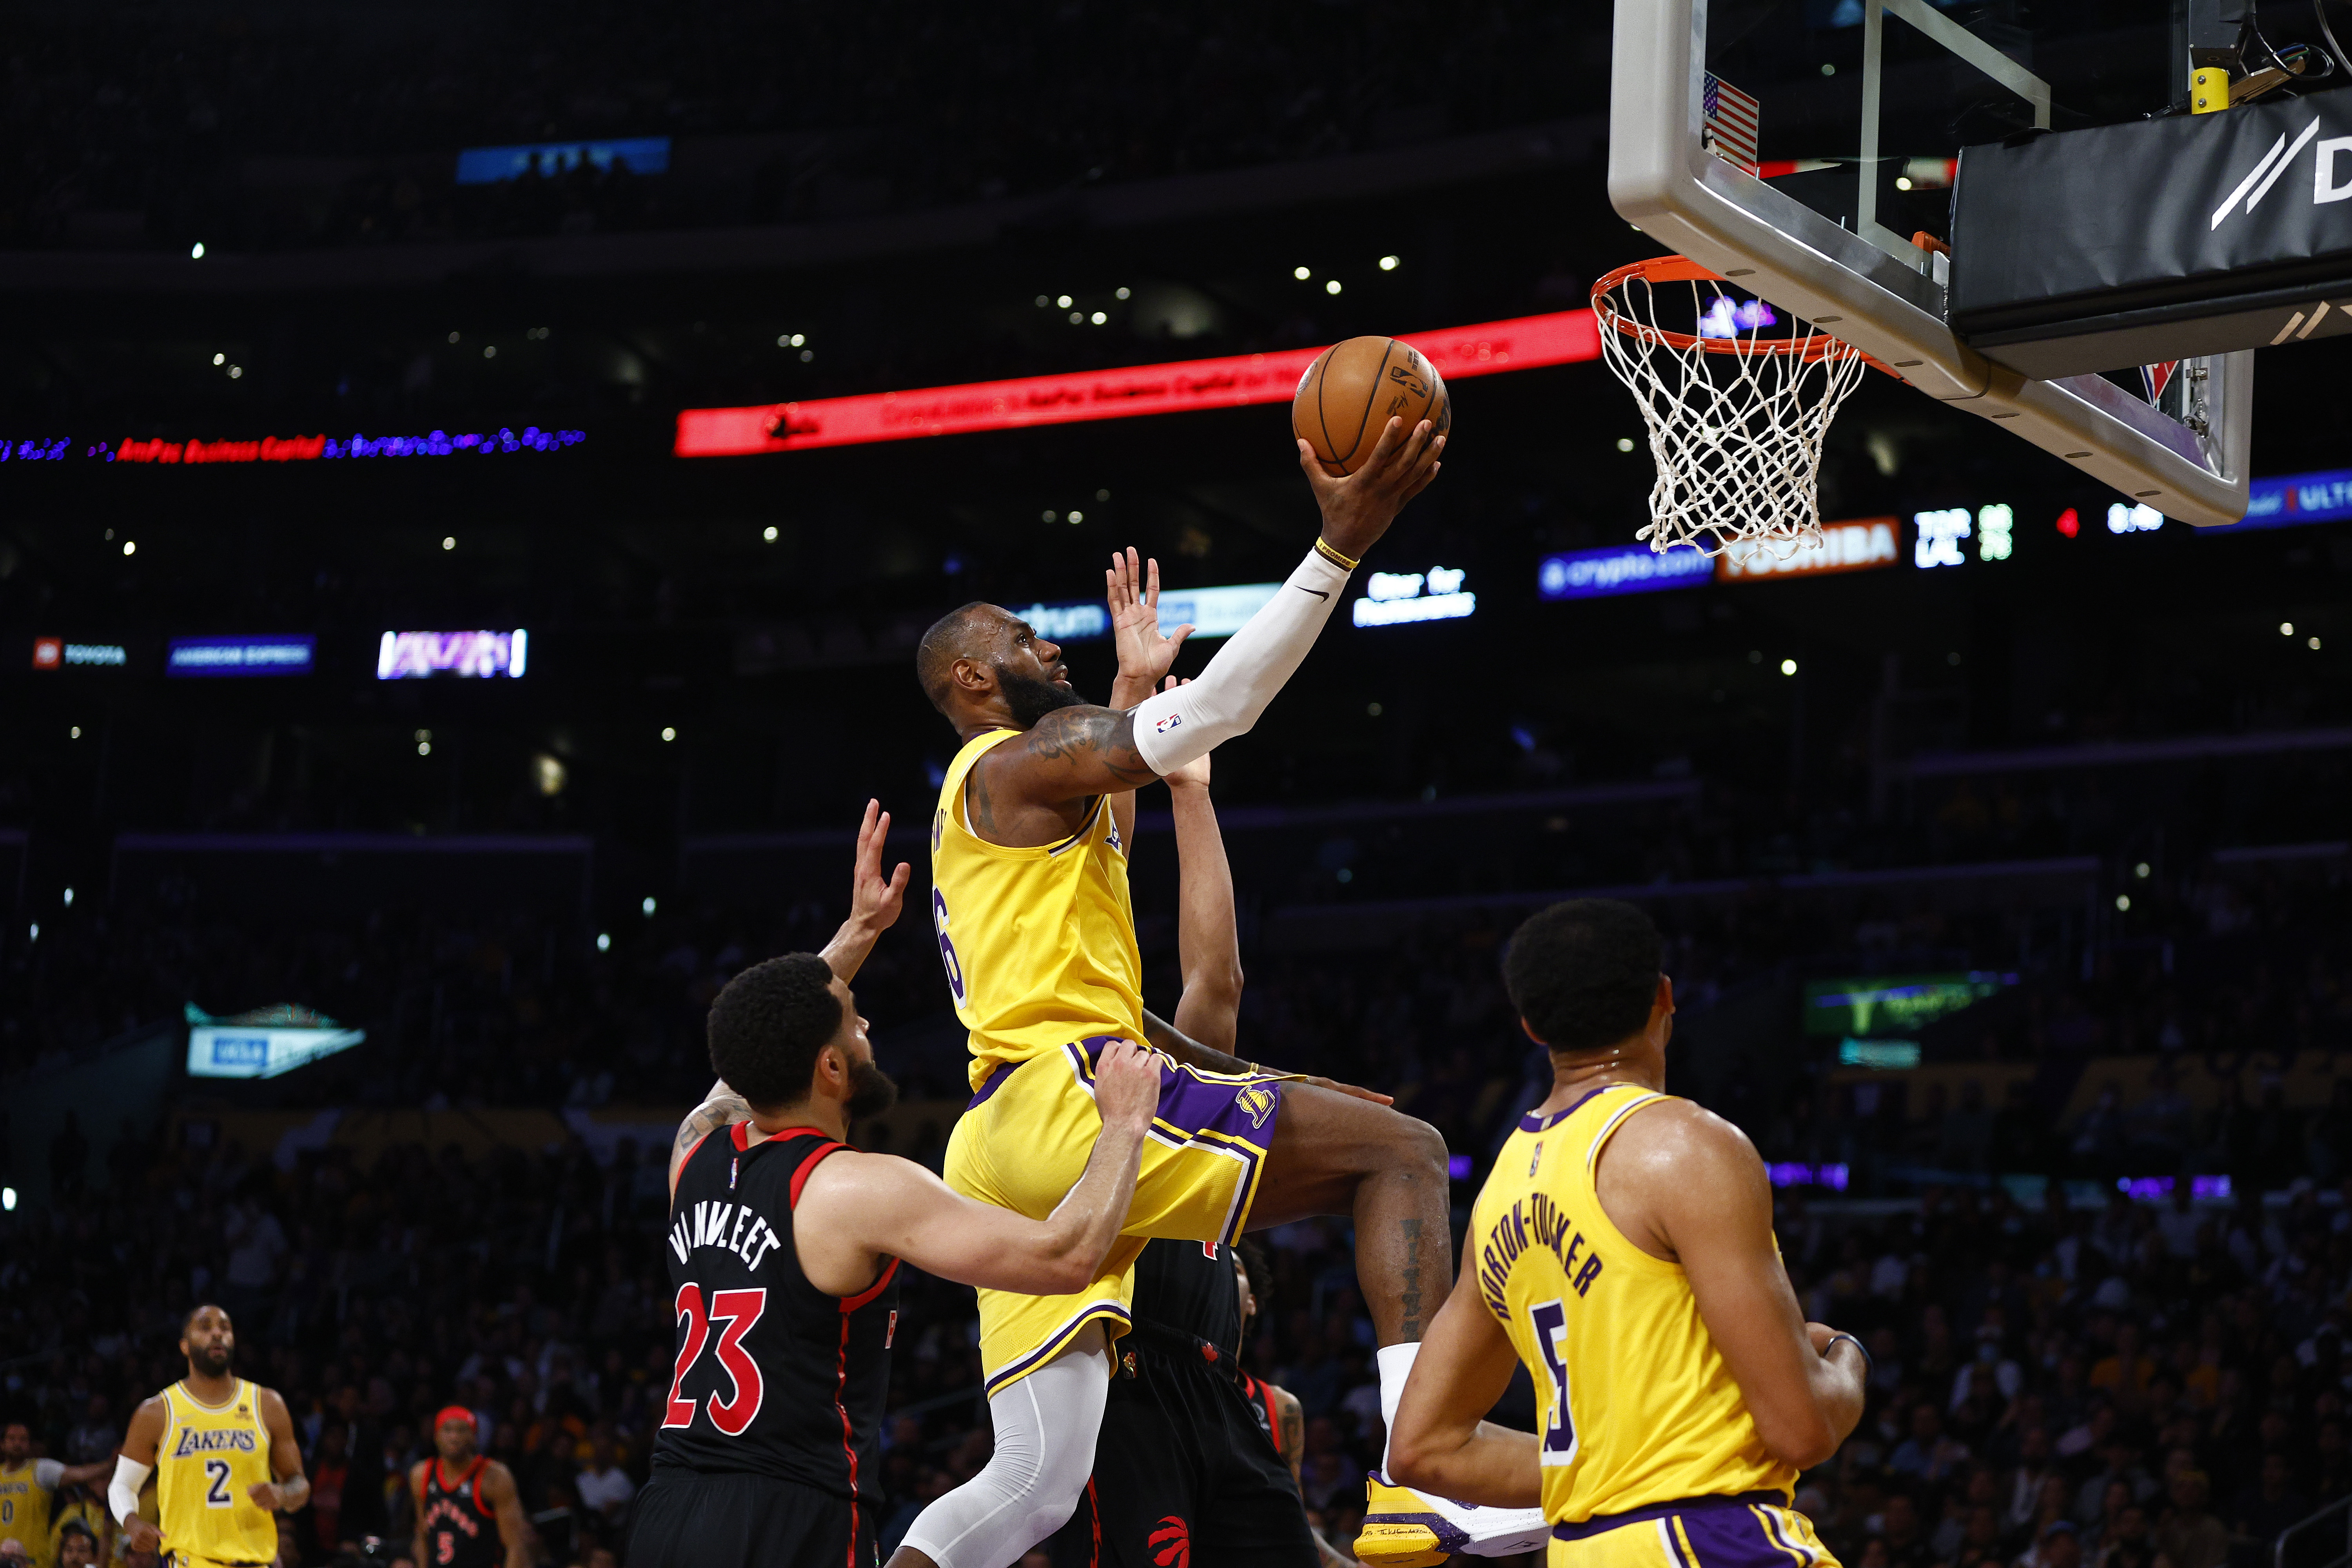 Los Angeles Lakers forward LeBron James attempts a layup against the Toronto Raptors.